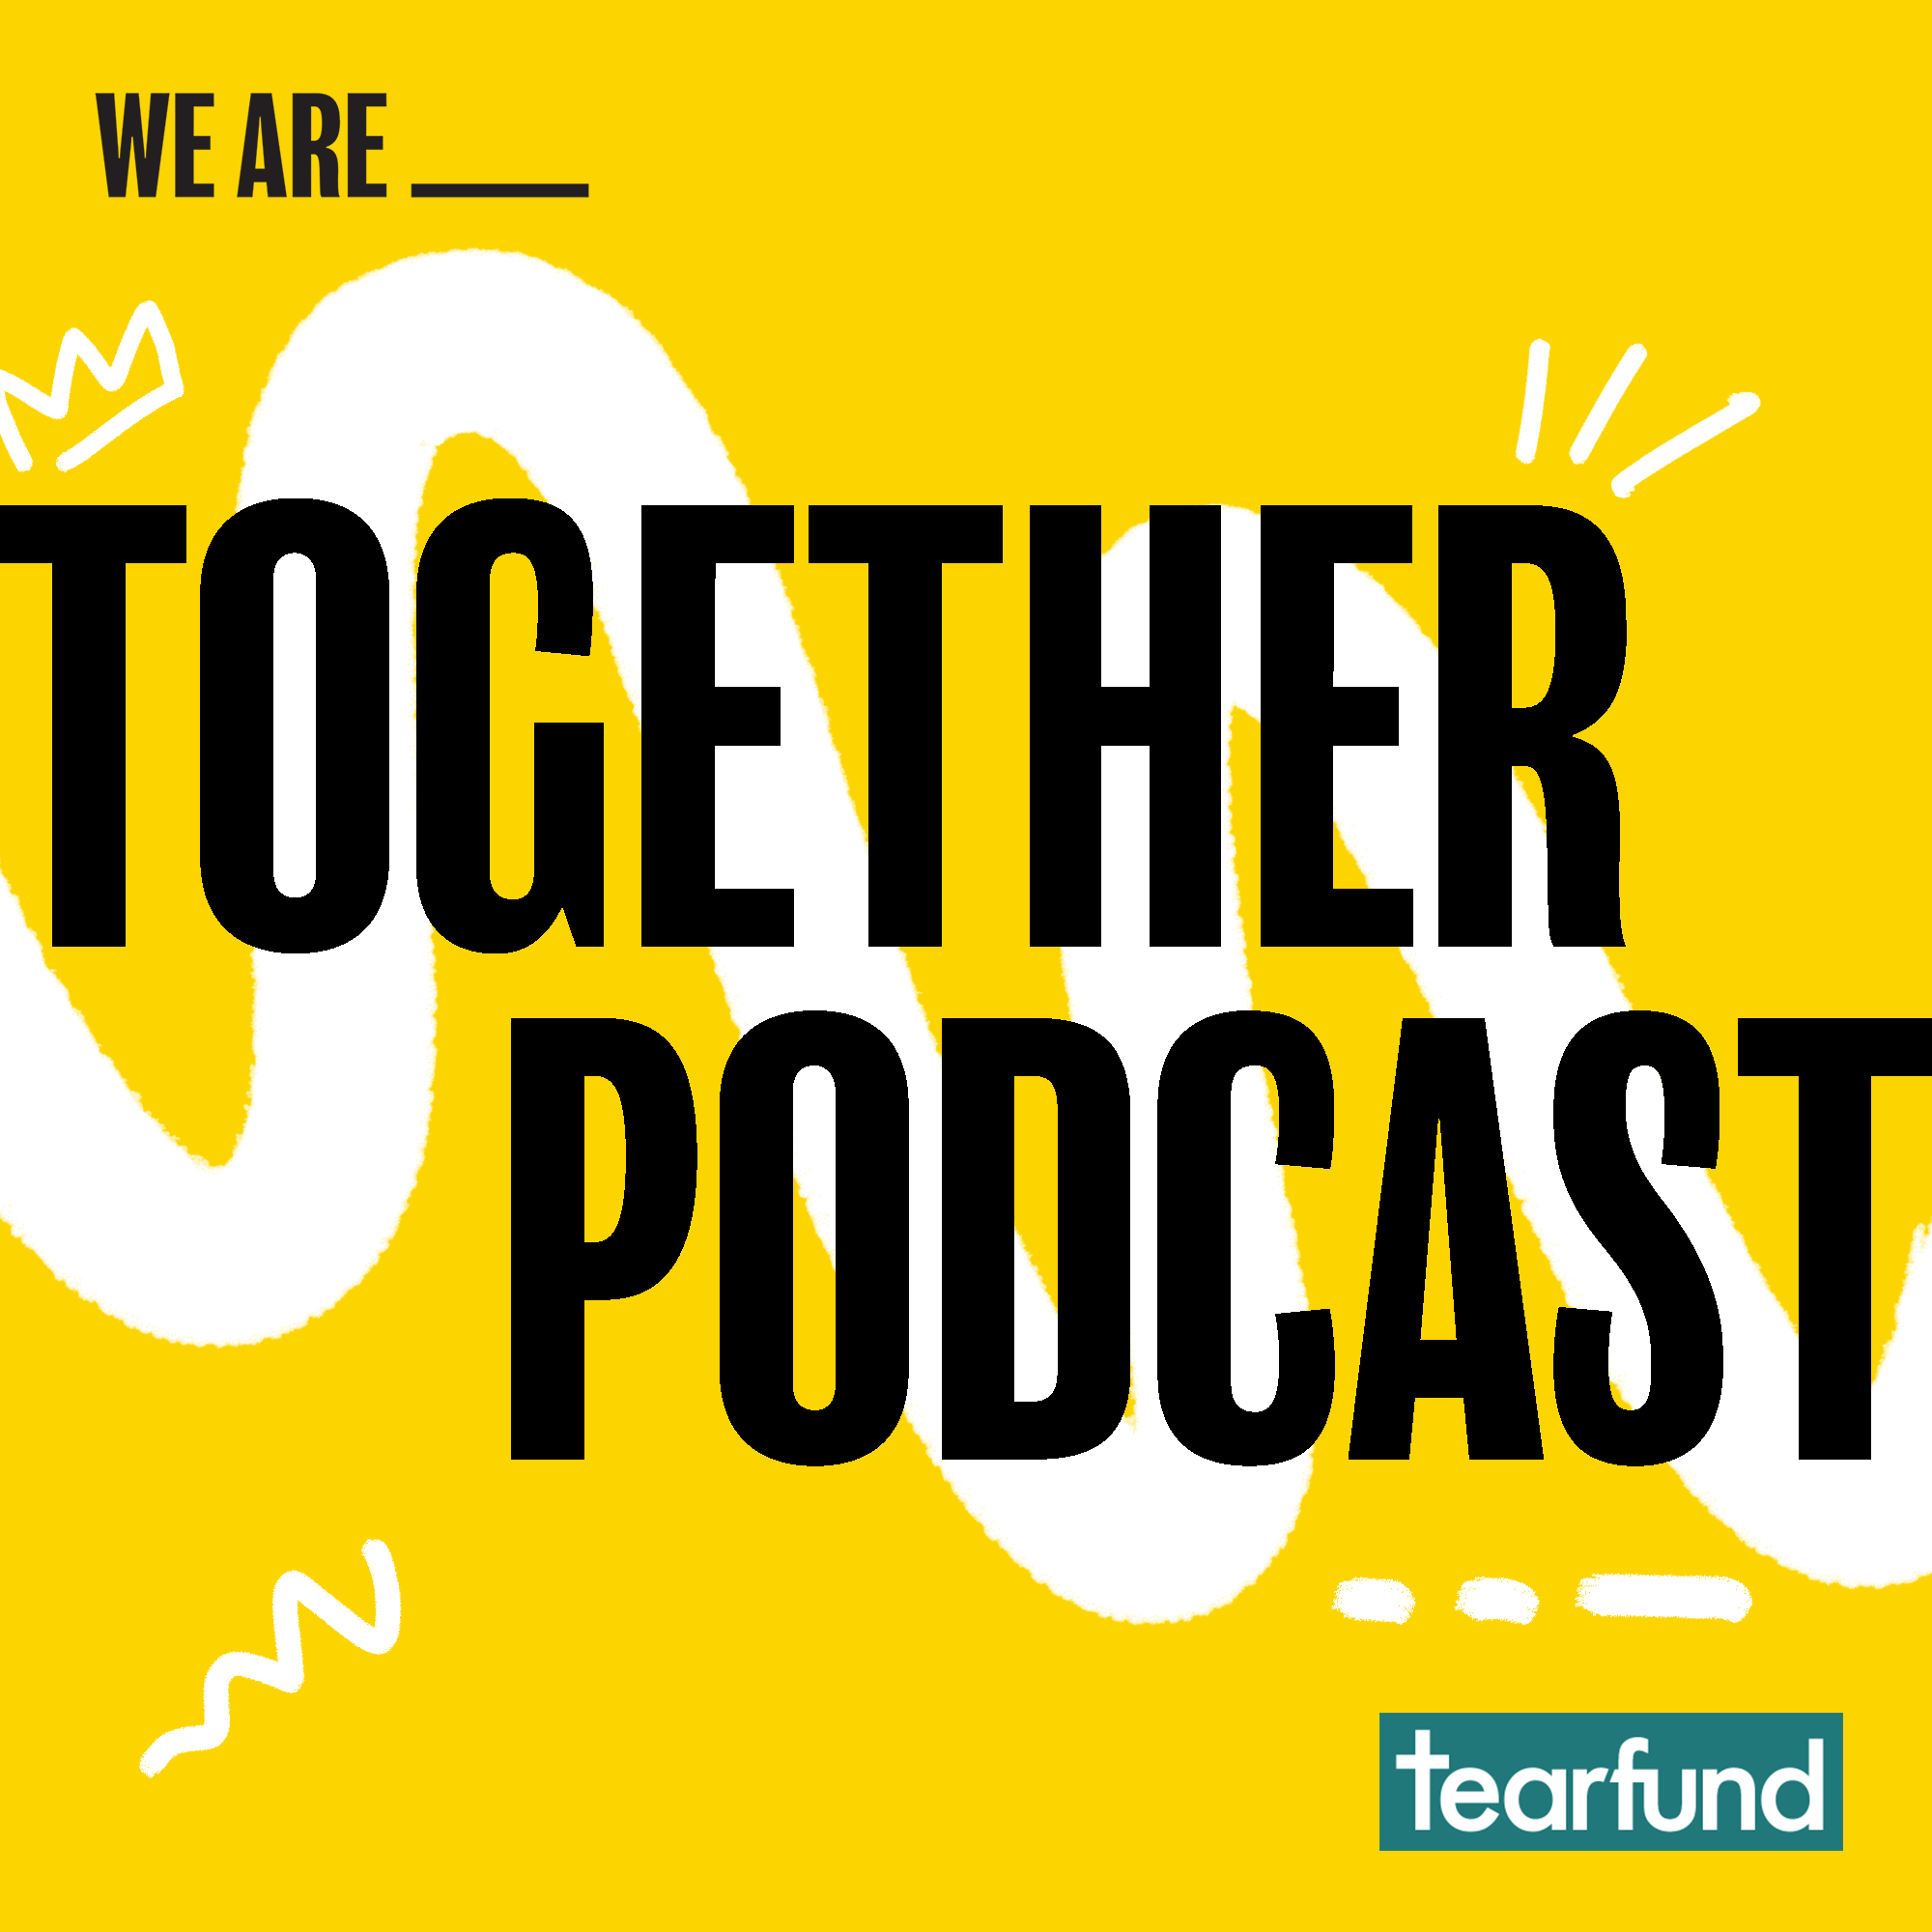 Together Podcast | A conversation about faith, justice and how to change the world